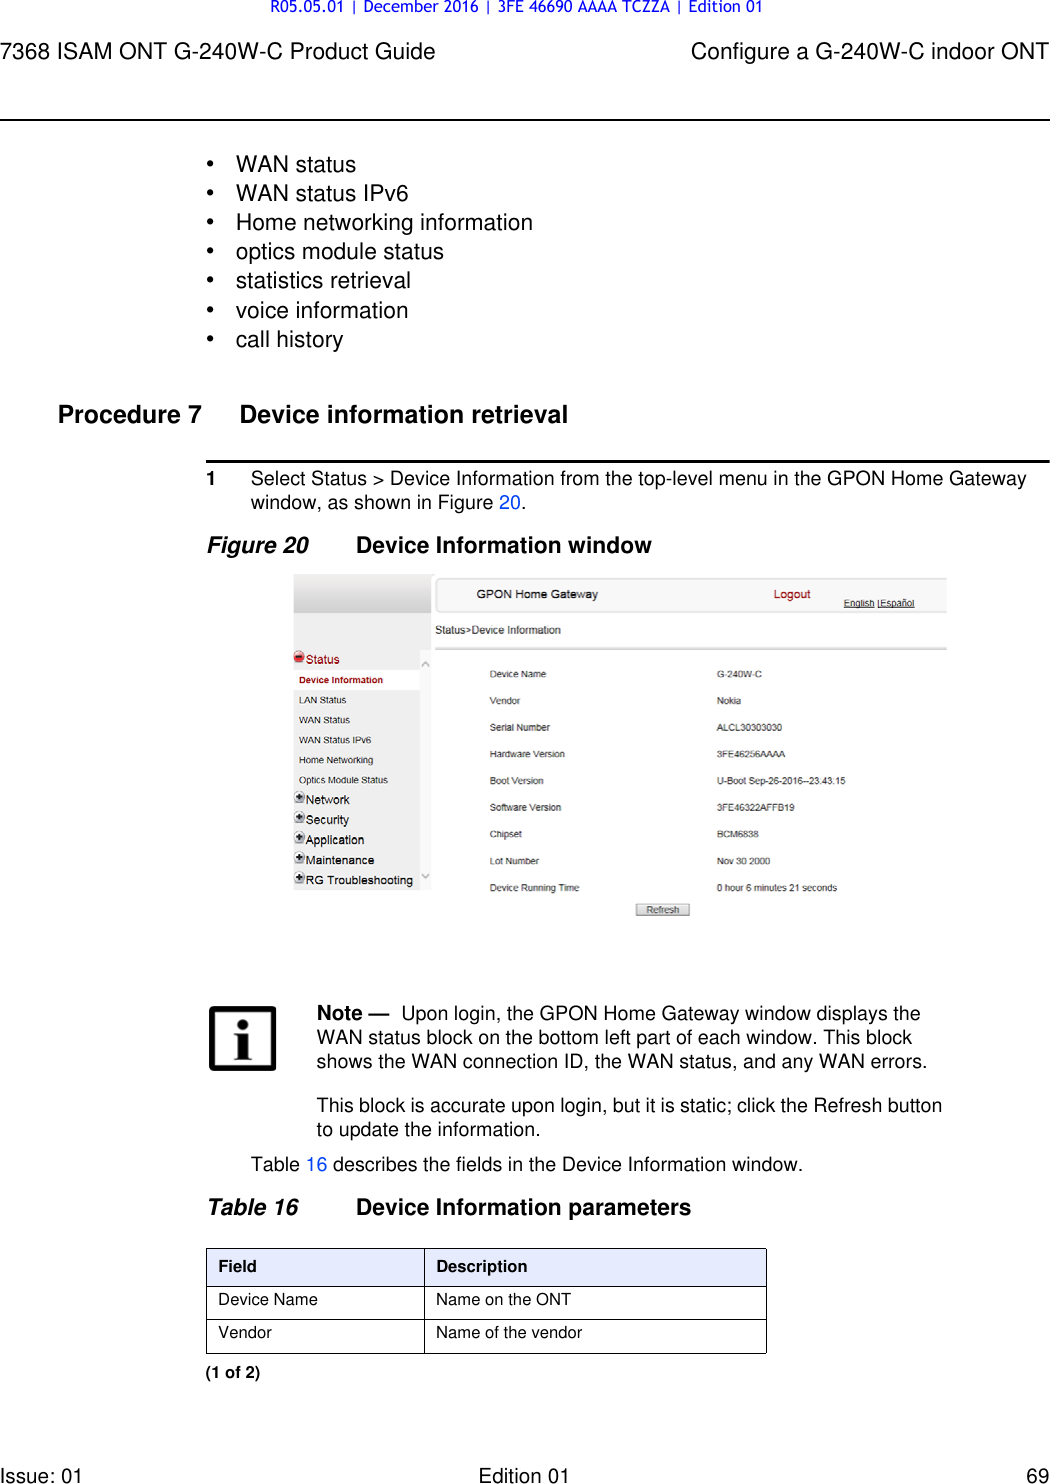 Page 69 of Nokia Bell G240W-C GPON ONU User Manual 7368 ISAM ONT G 240W B Product Guide